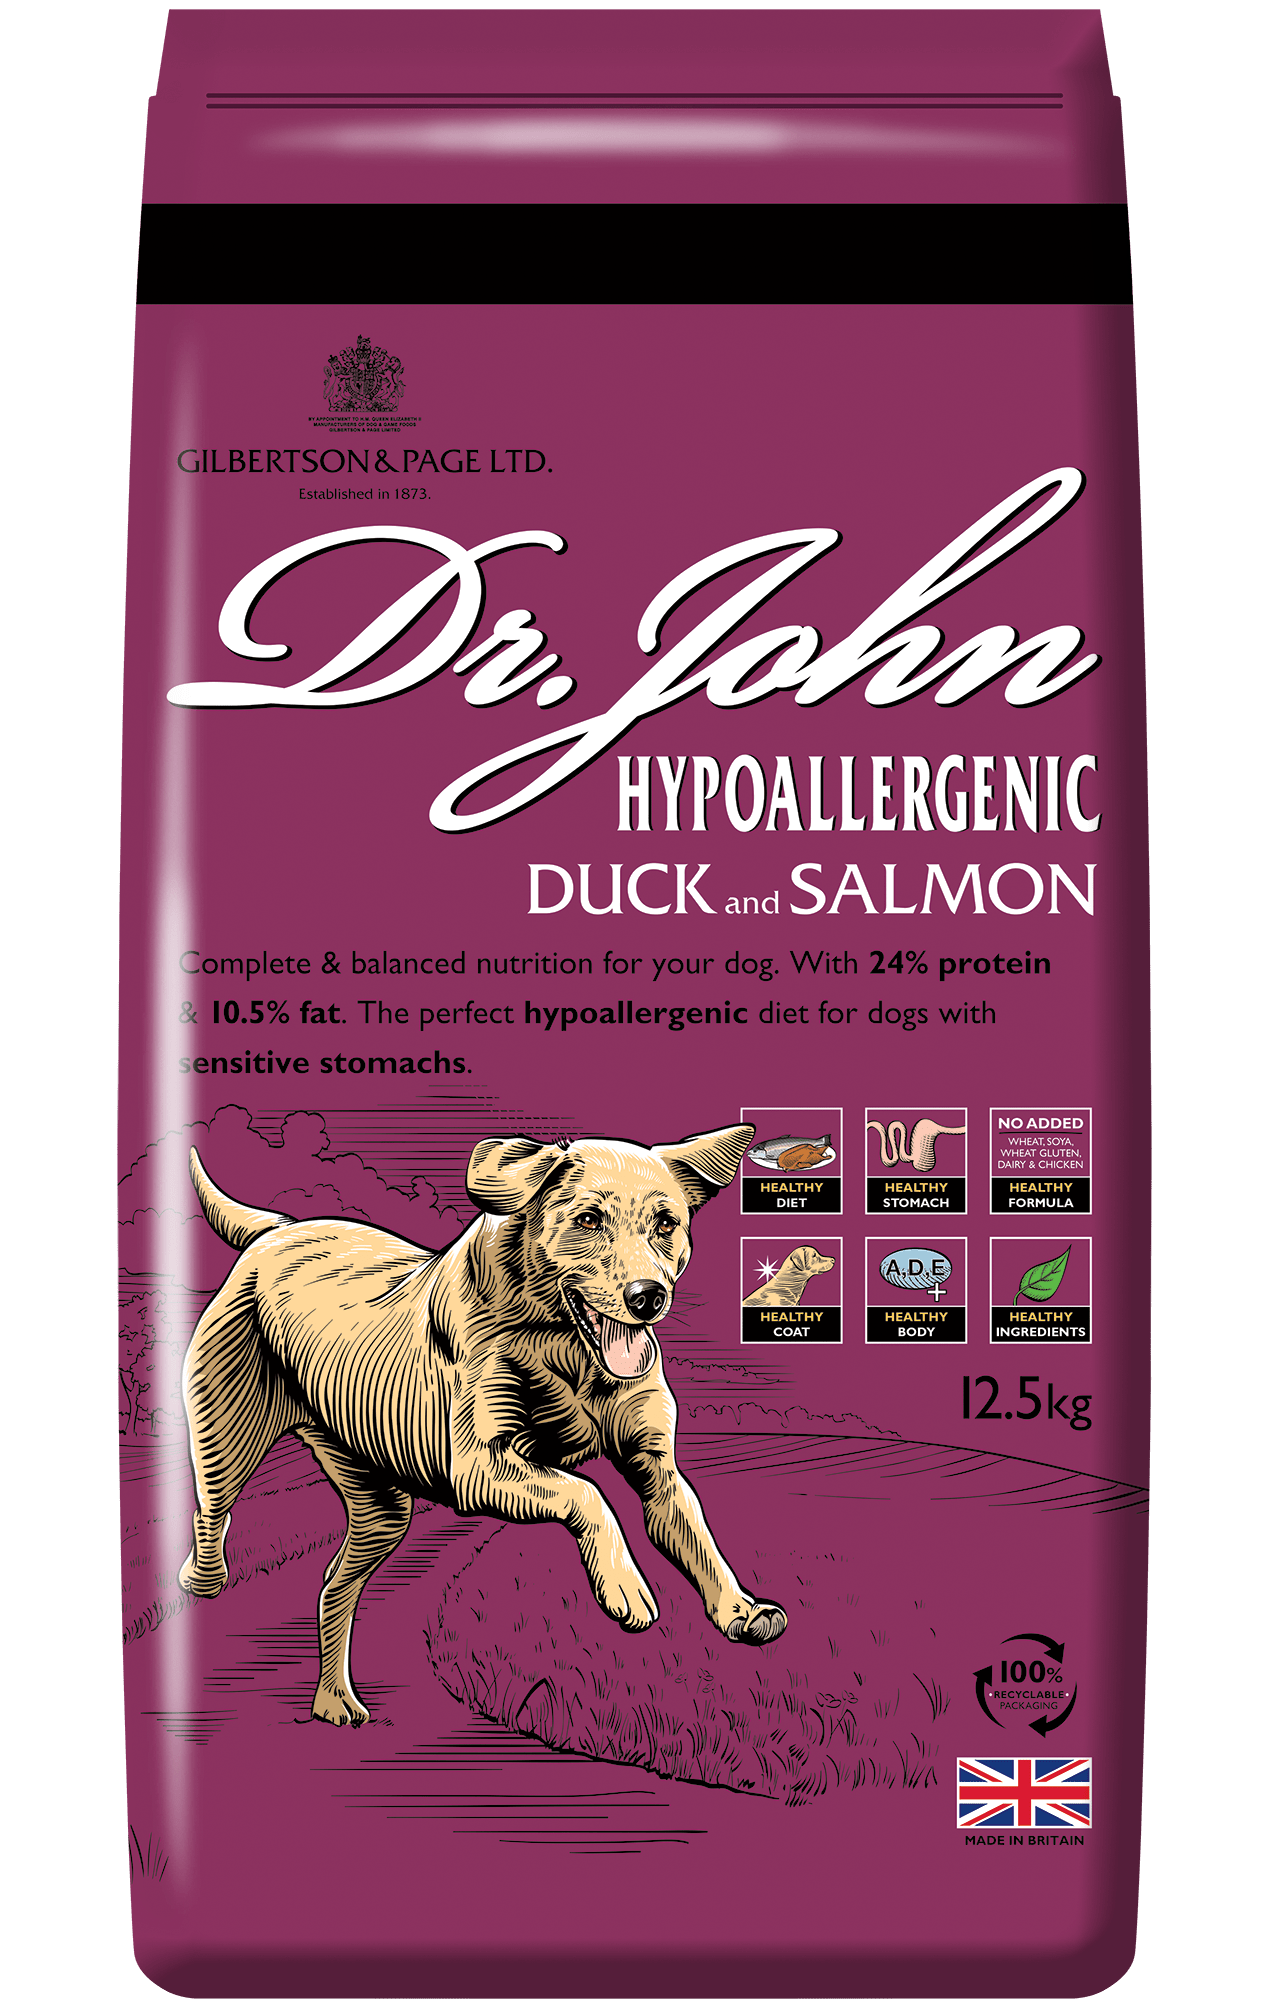 Dr. John Hypoallergenic Duck and Salmon Dry Adult Dog Food, Dr John, 2 kg